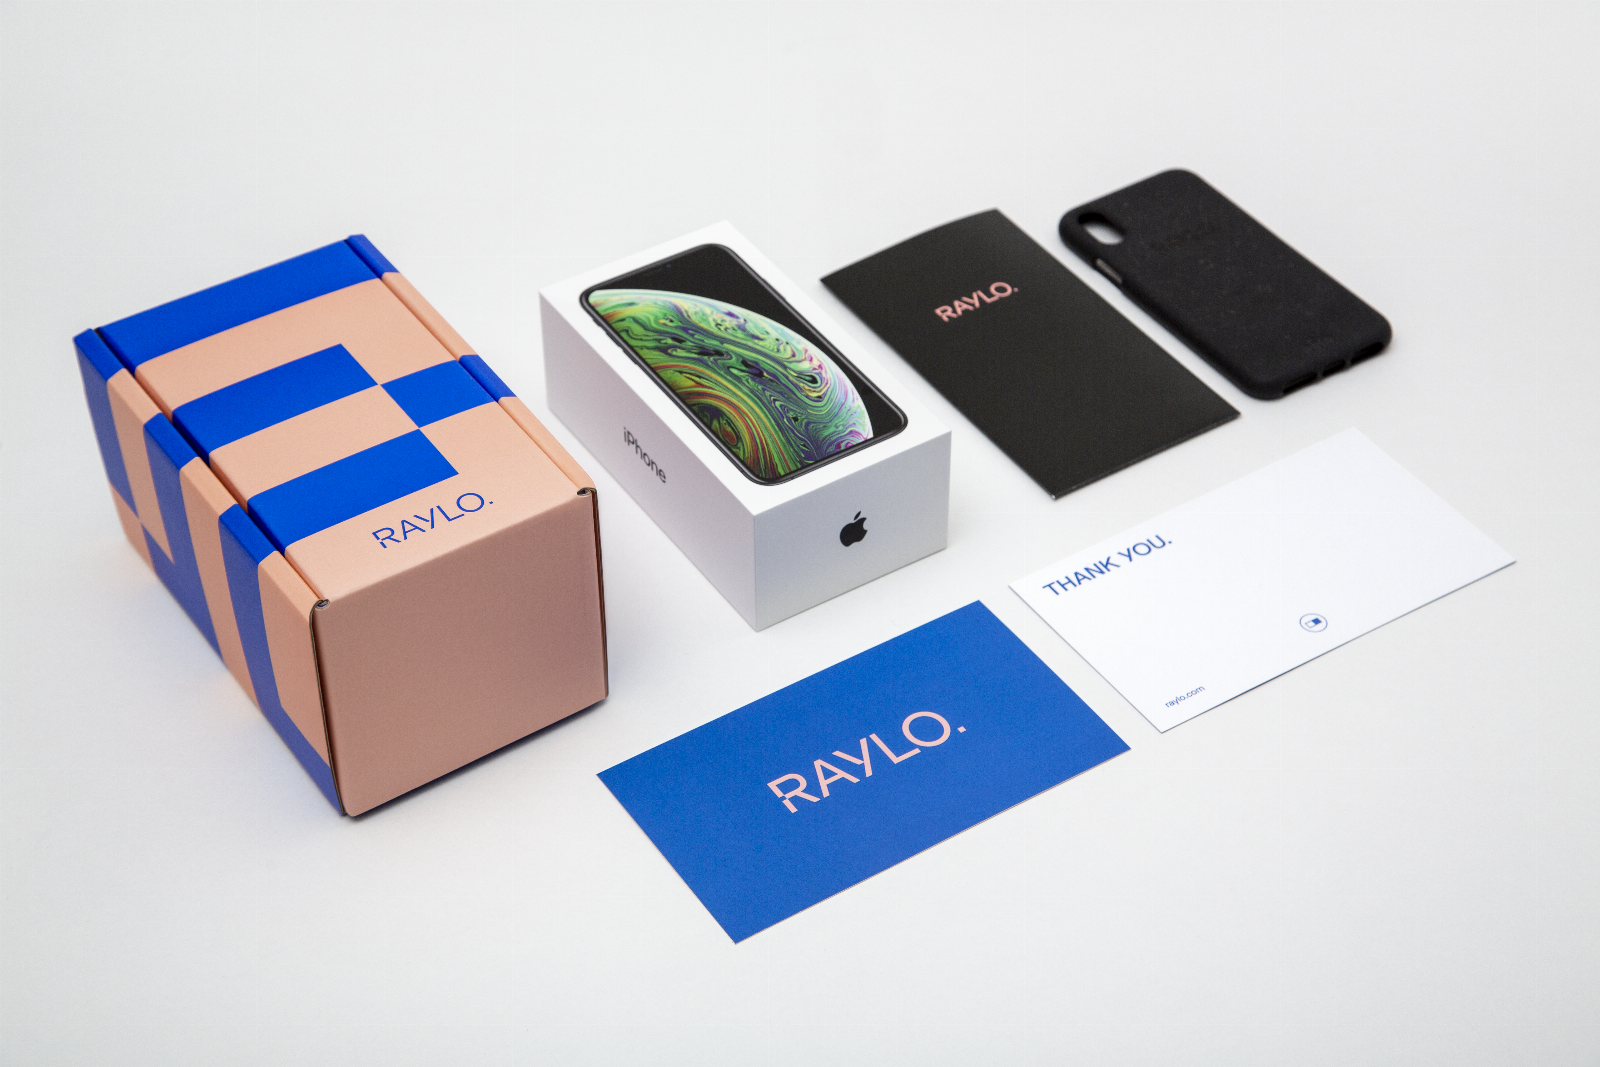 Raylo raises $136M to build out its gadget lease-and-reuse ‘fintech’ platform